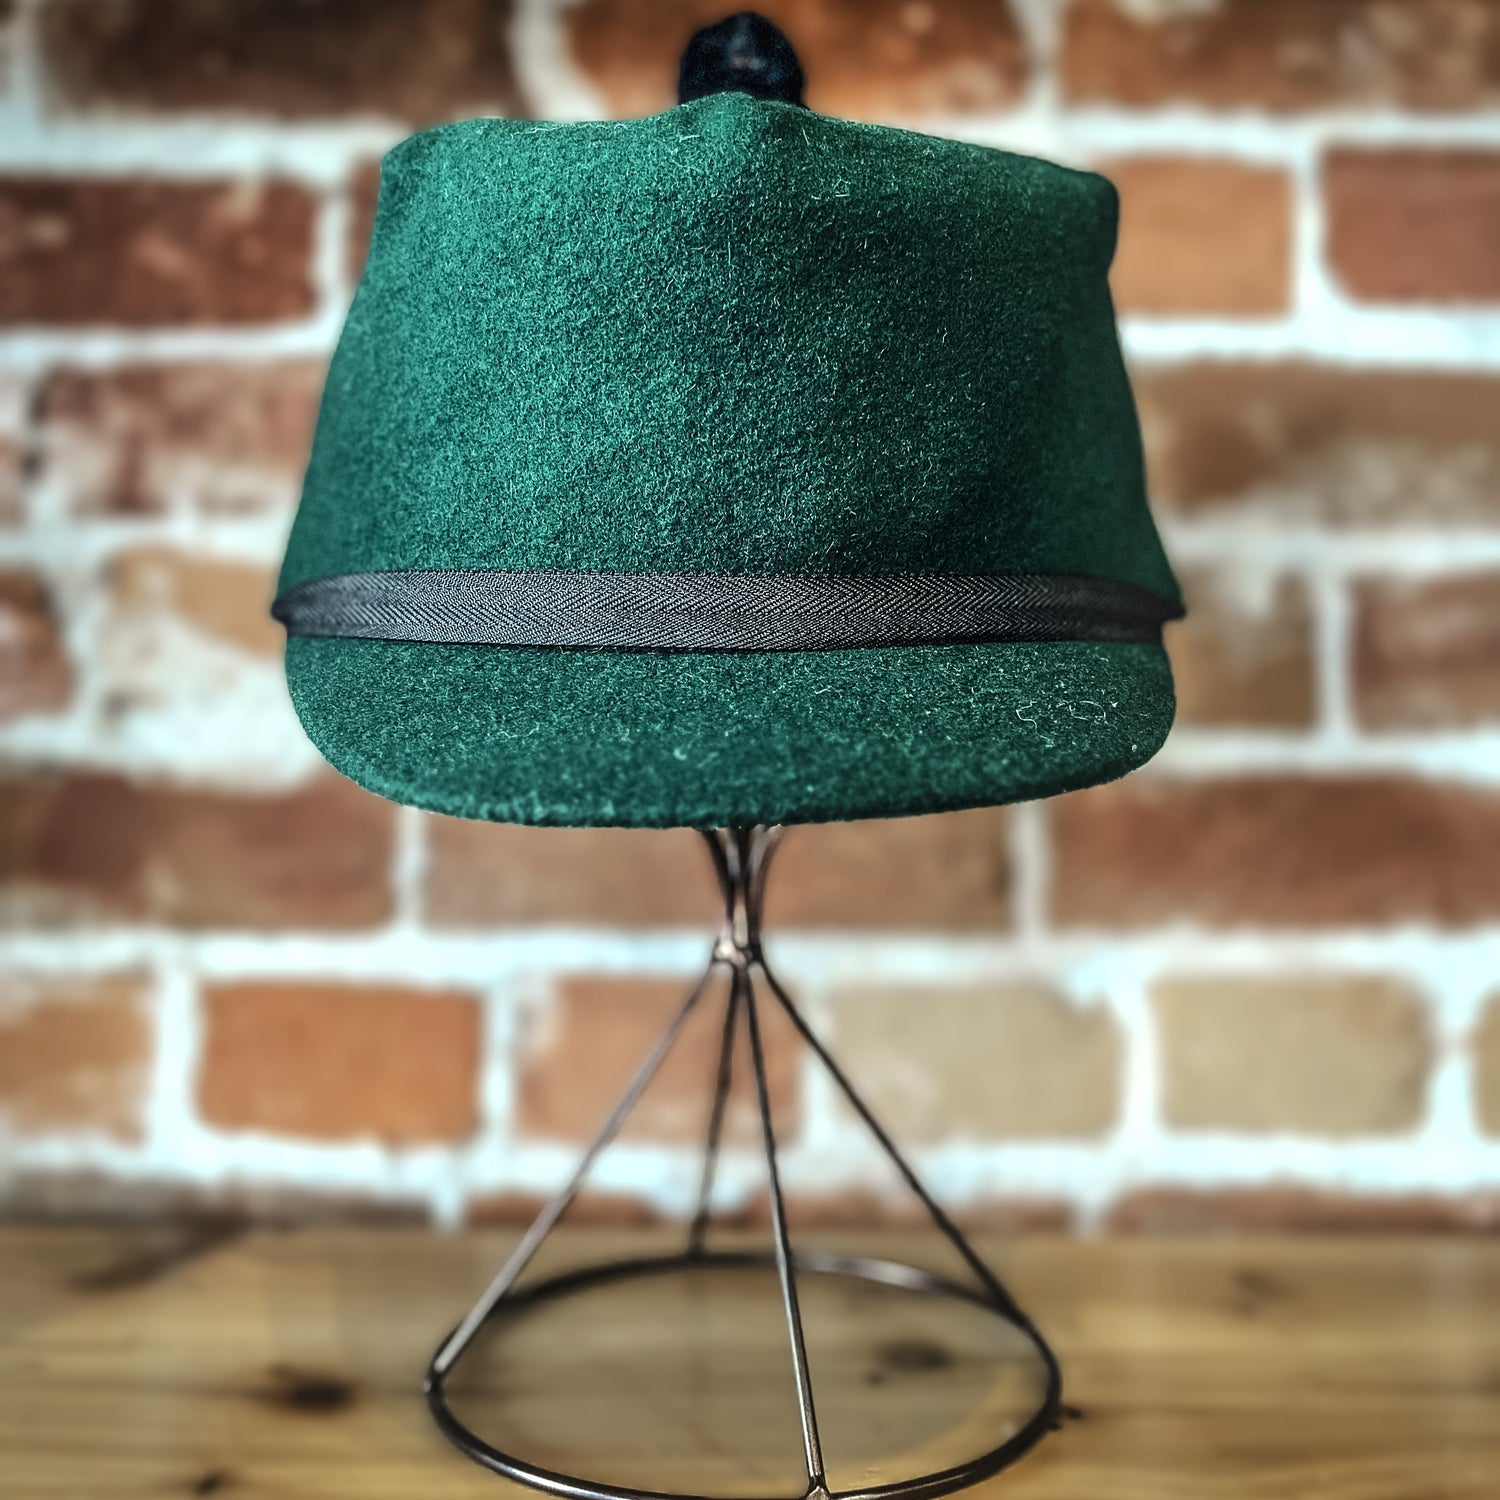 Solid Green Wool Blend Melton Stockman Cap view of cap